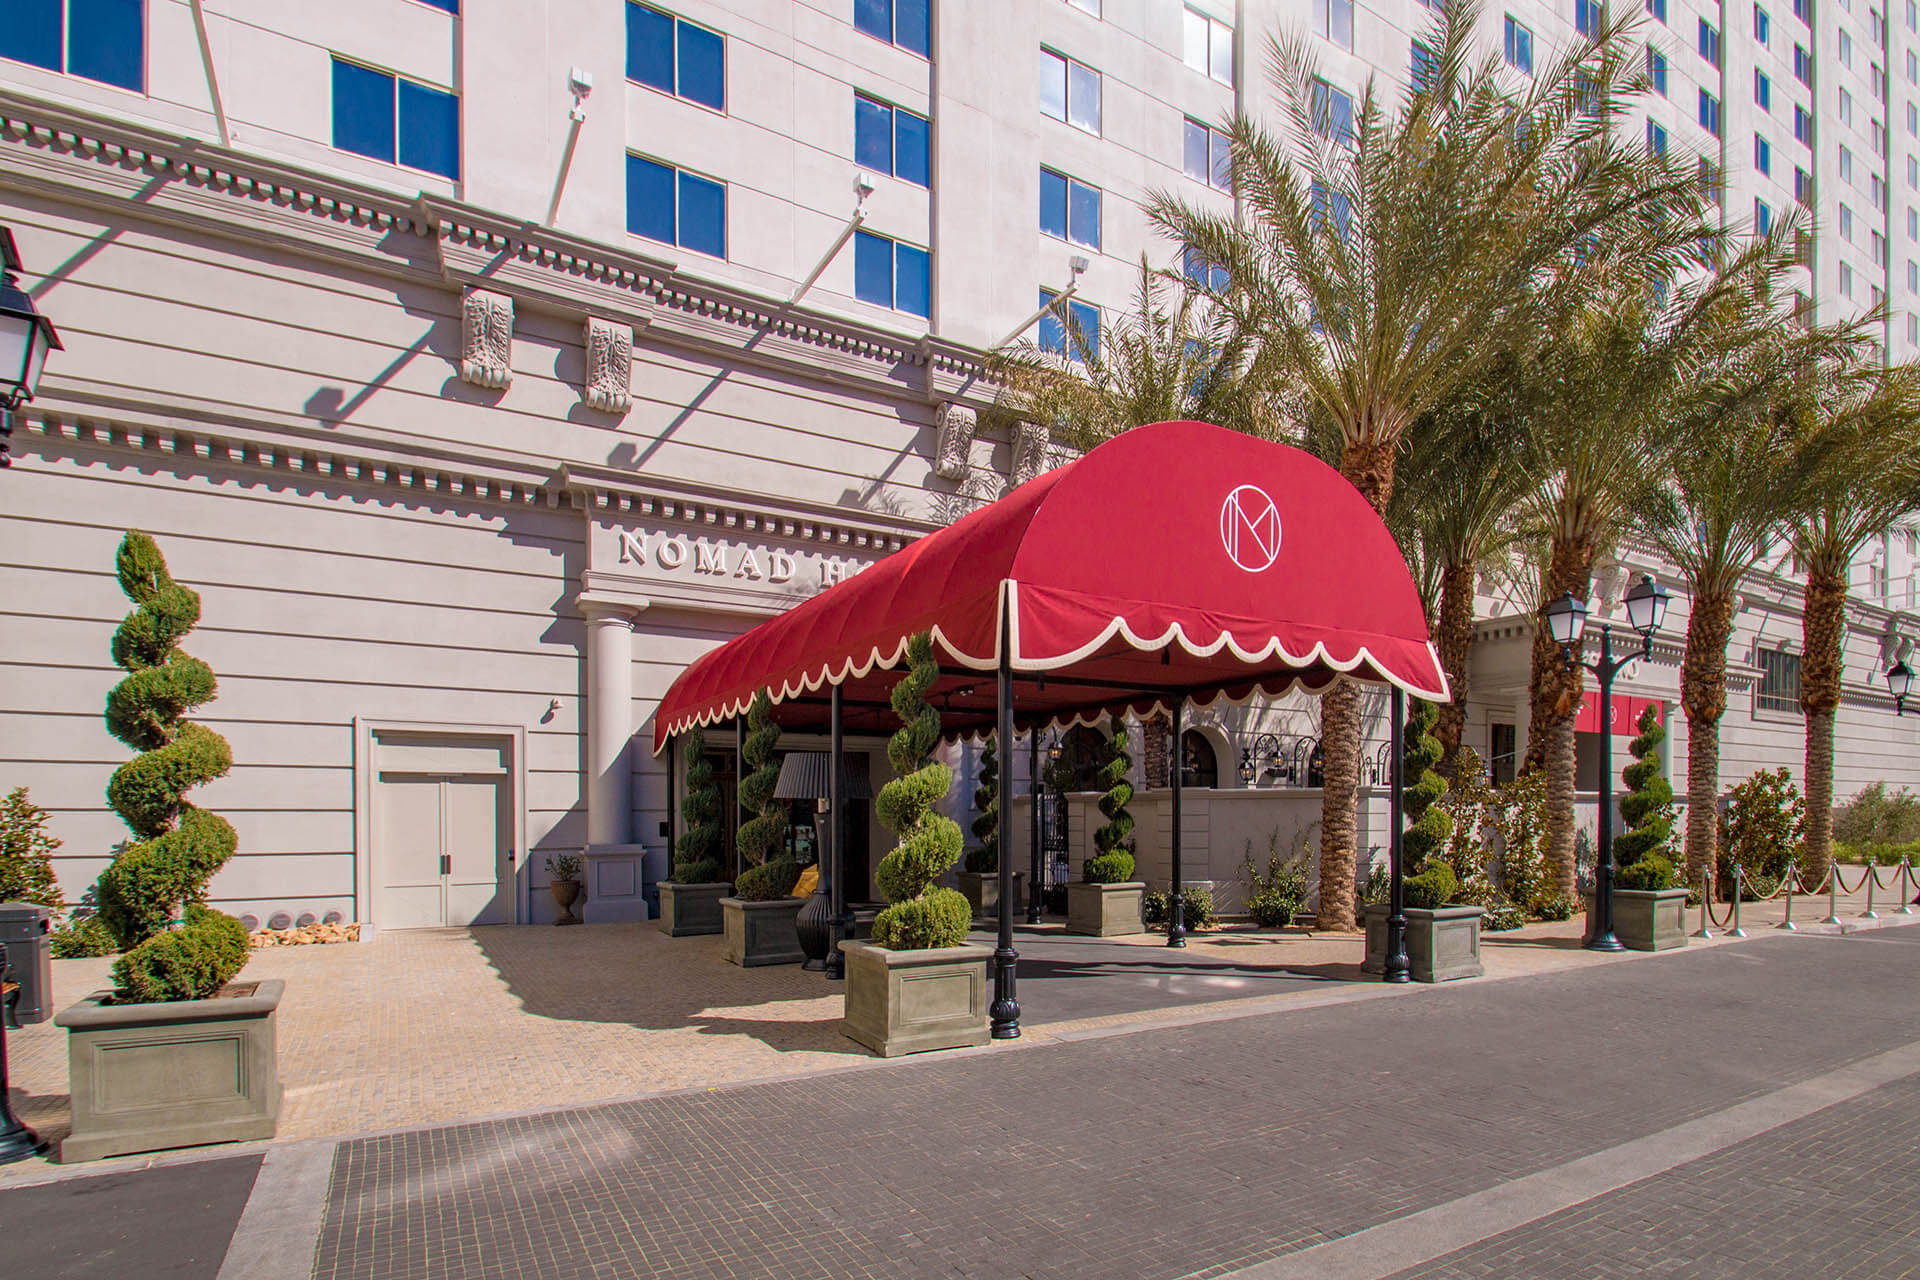 NoMad Hotel of Park MGM Las Vegas - Entryway Awning Canopy by Metro Awnings